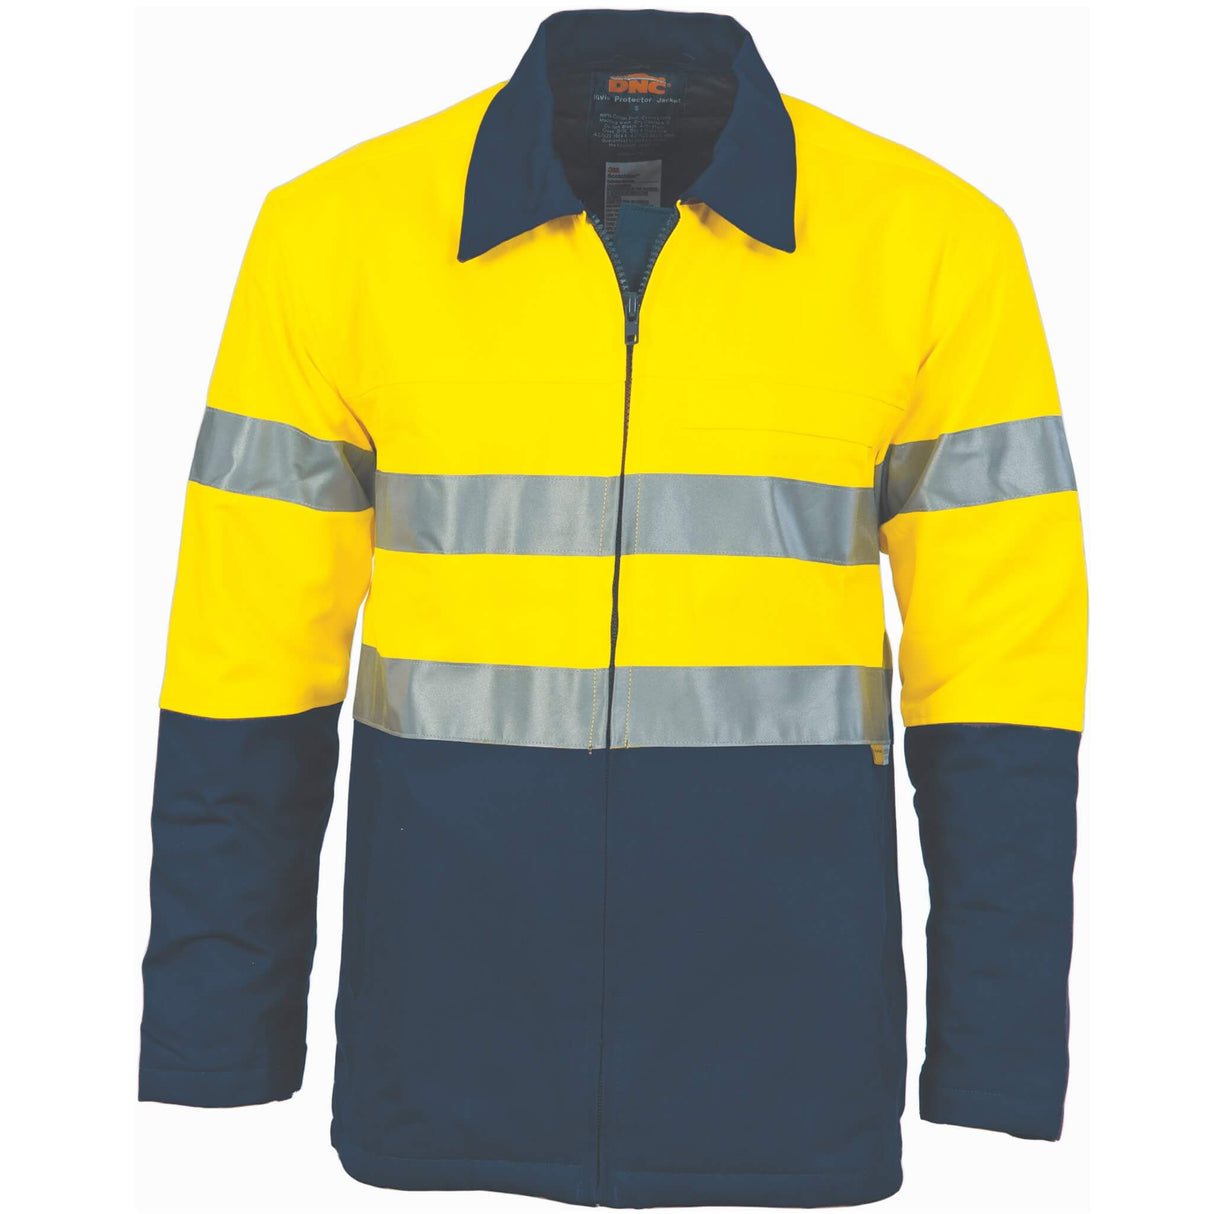 3858 - HiVis Two Tone Protect or Drill Jacket with 3M Tape